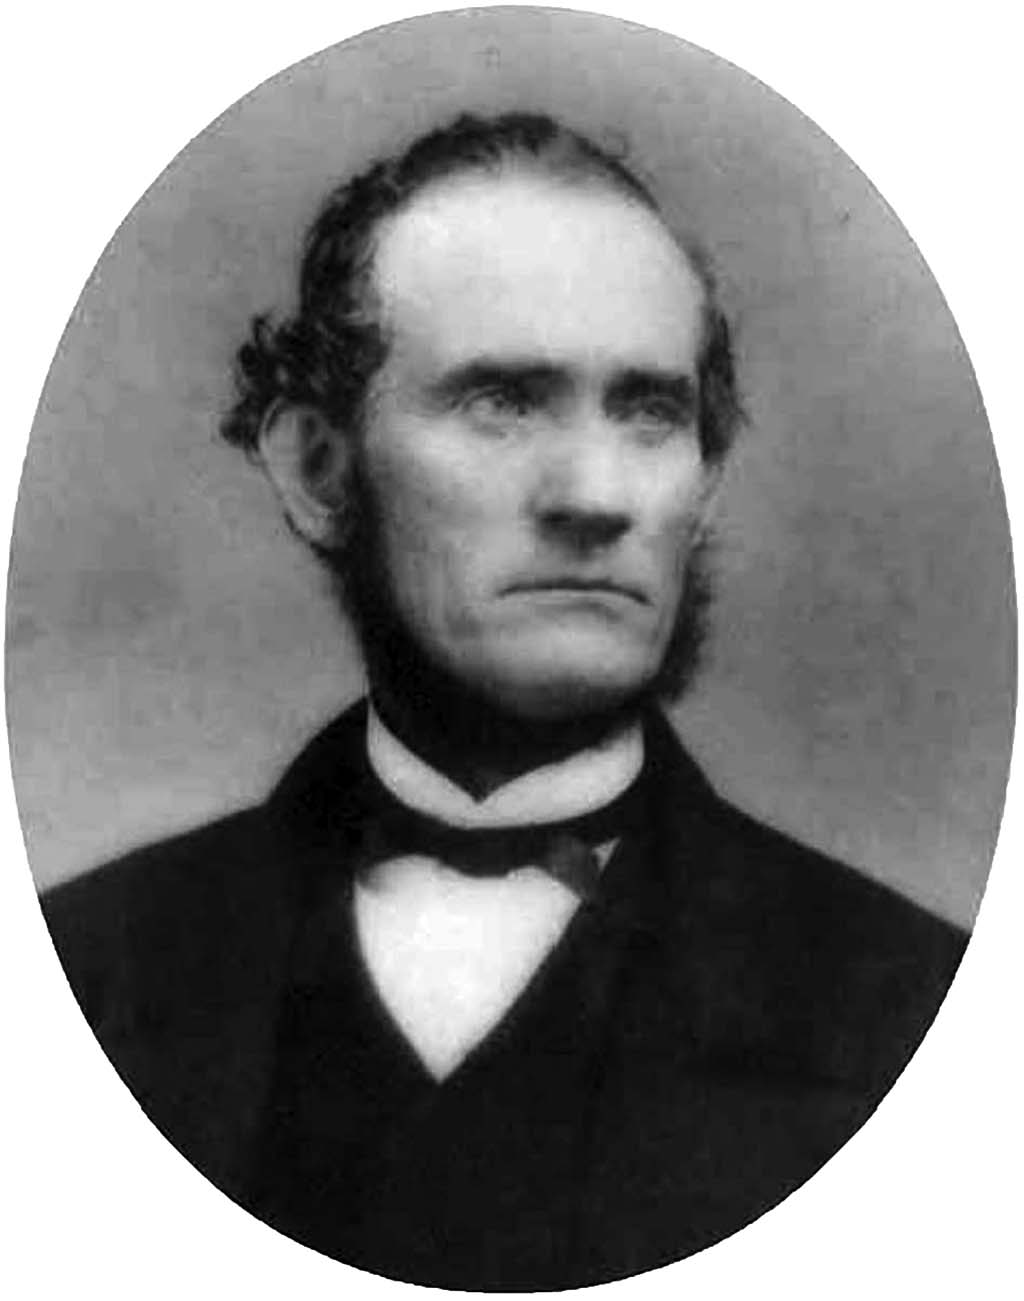 https://www.historylink.org/Content/Media/Photos/Large/young-arthur-denny-1850-1860.jpg